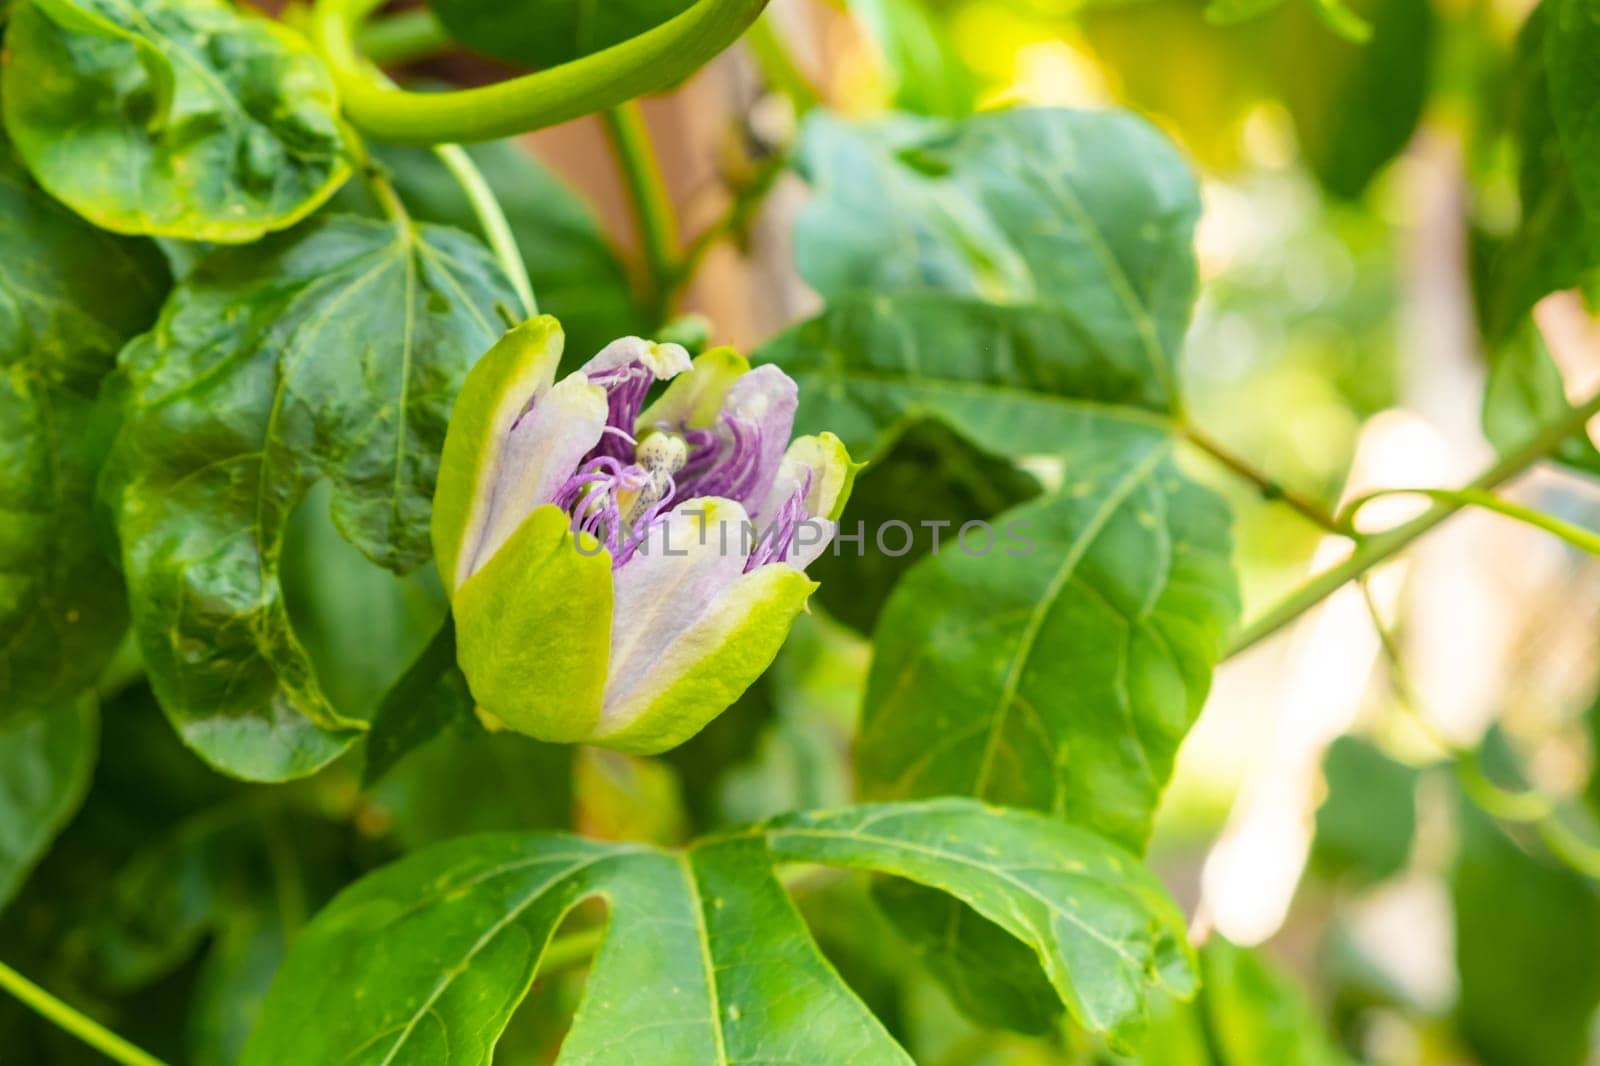 Exotic flower of passion fruit in blossom on the tree.